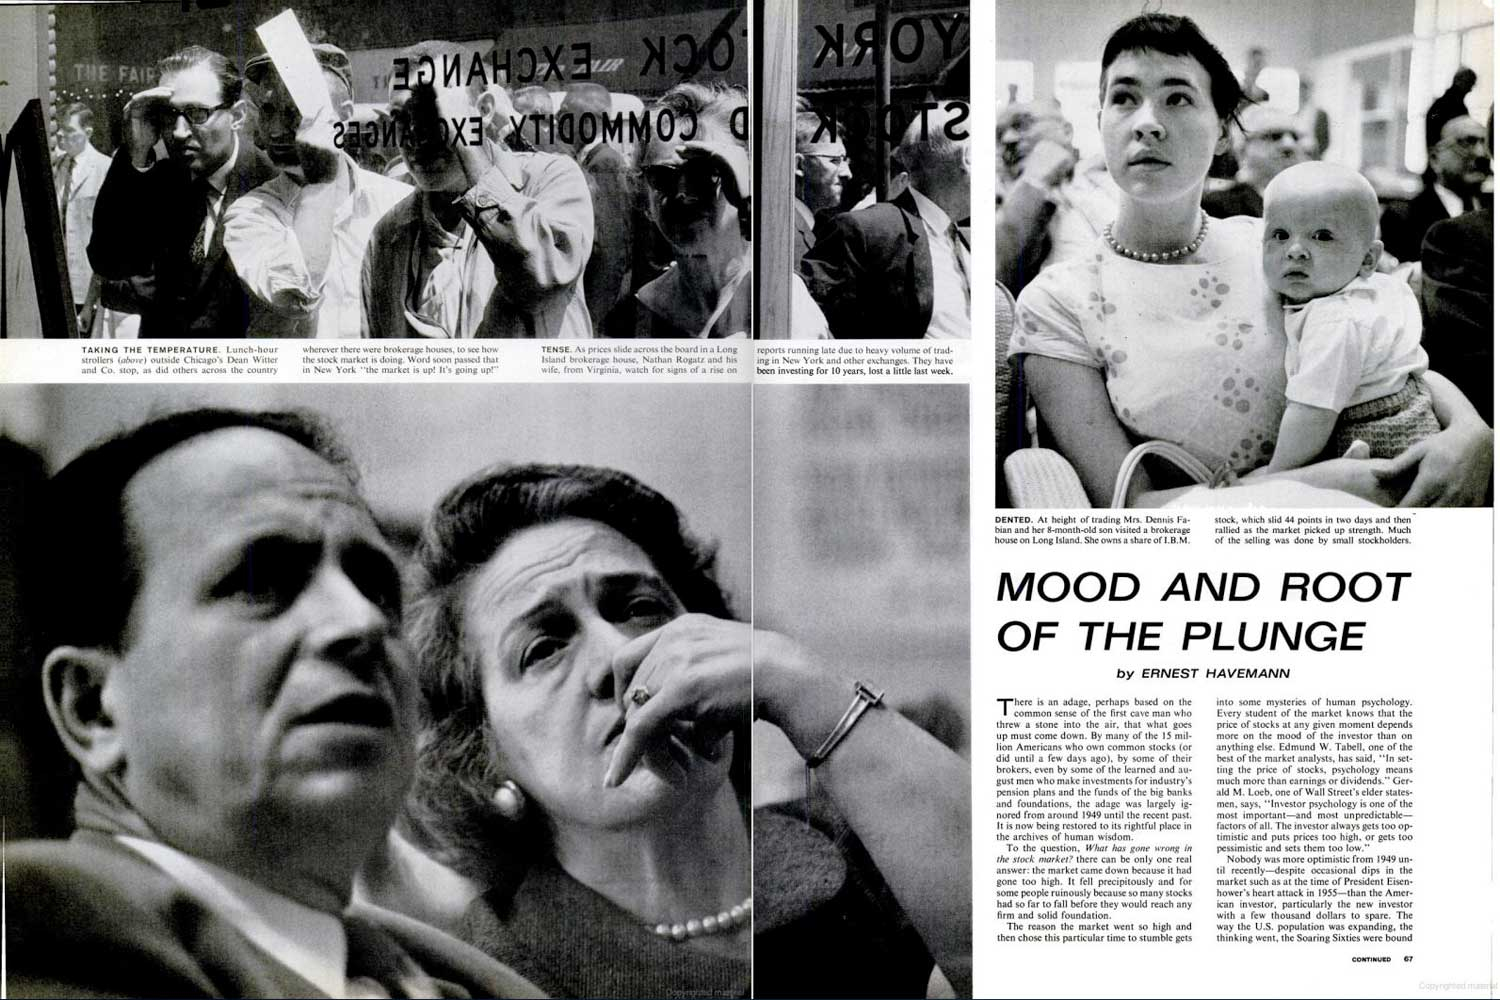 Page spreads from June 8, 1962, issue of LIFE.